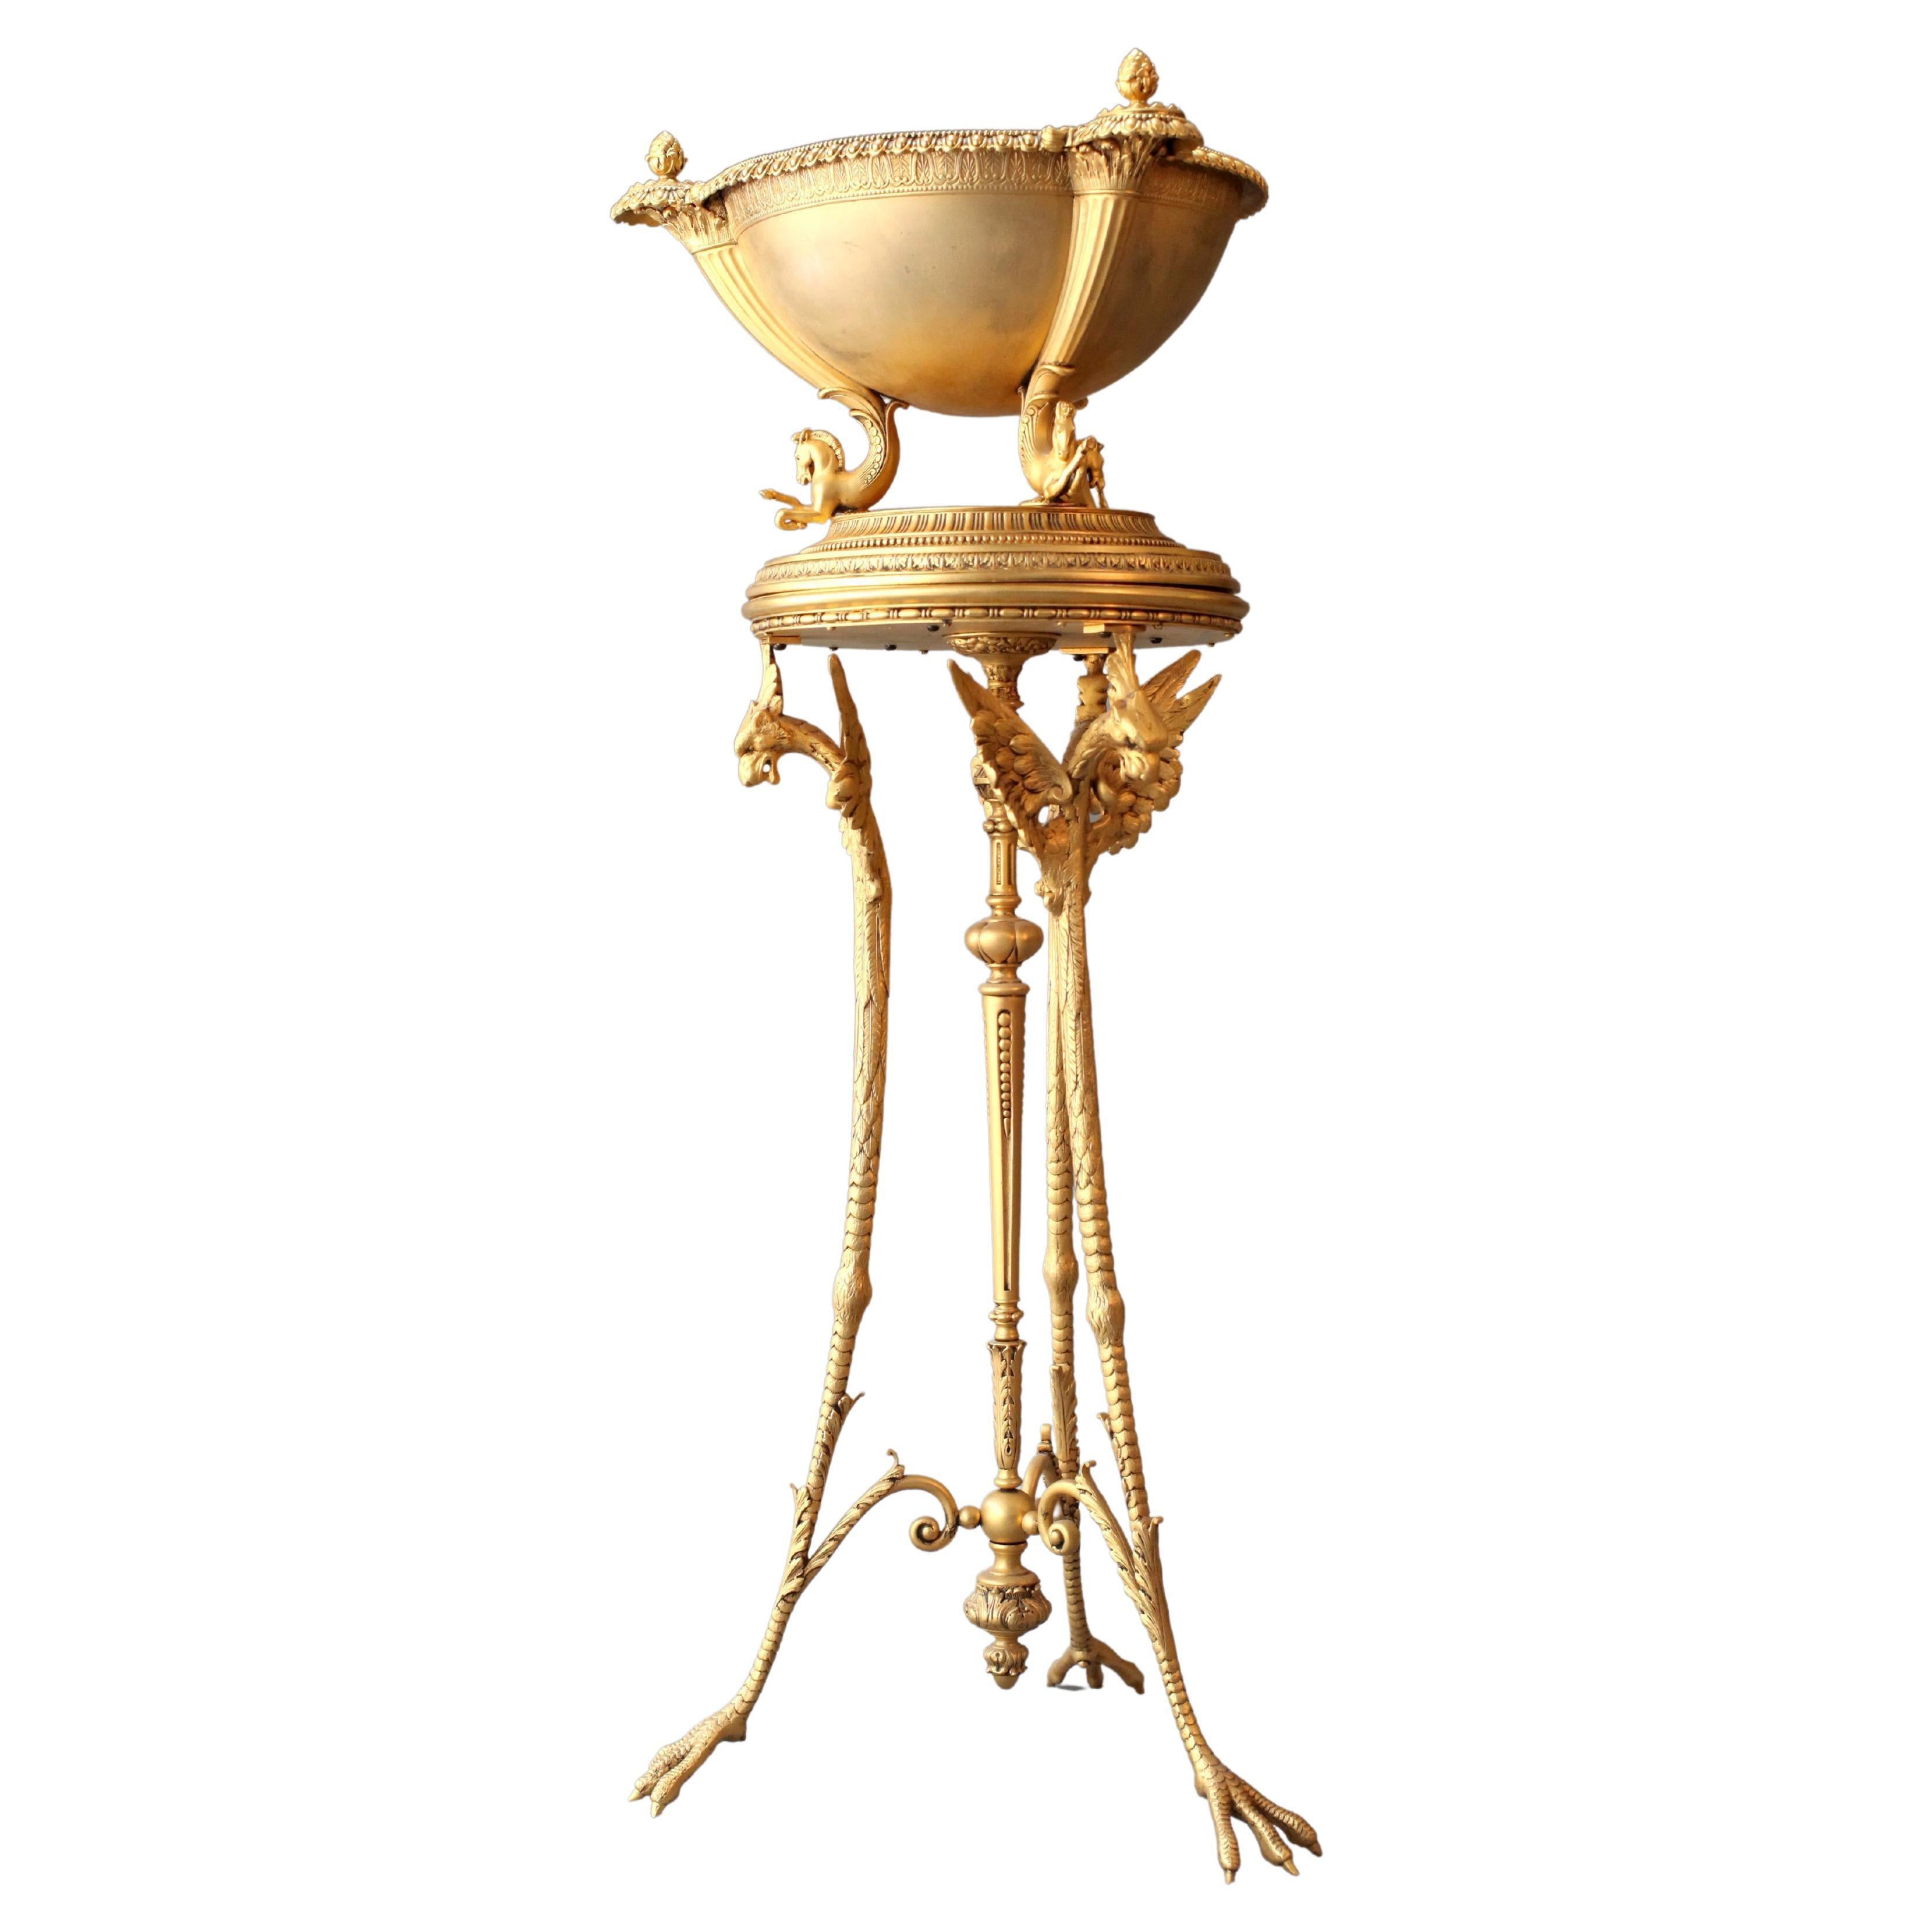 Antique Louis XVI Style Gilt Bronze Athénienne Compote By Meridan Brittania Co For Sale